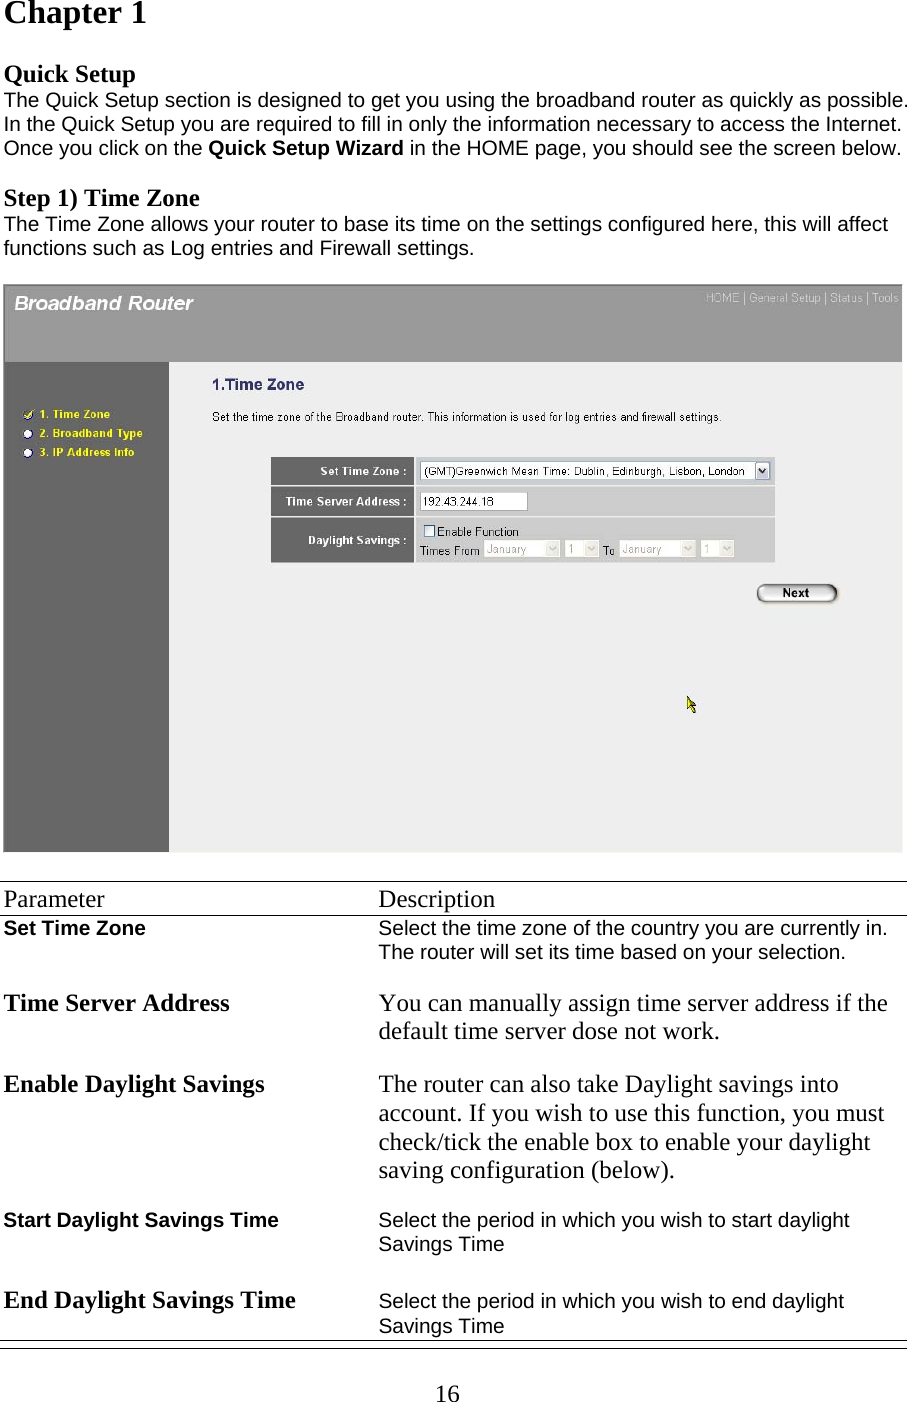 Chapter 1  Quick Setup The Quick Setup section is designed to get you using the broadband router as quickly as possible. In the Quick Setup you are required to fill in only the information necessary to access the Internet. Once you click on the Quick Setup Wizard in the HOME page, you should see the screen below.   Step 1) Time Zone The Time Zone allows your router to base its time on the settings configured here, this will affect functions such as Log entries and Firewall settings.    Parameter    Description Set Time Zone  Select the time zone of the country you are currently in. The router will set its time based on your selection.   Time Server Address You can manually assign time server address if the default time server dose not work.  Enable Daylight Savings The router can also take Daylight savings into account. If you wish to use this function, you must check/tick the enable box to enable your daylight saving configuration (below).  Start Daylight Savings Time  Select the period in which you wish to start daylight Savings Time  End Daylight Savings Time Select the period in which you wish to end daylight Savings Time  16